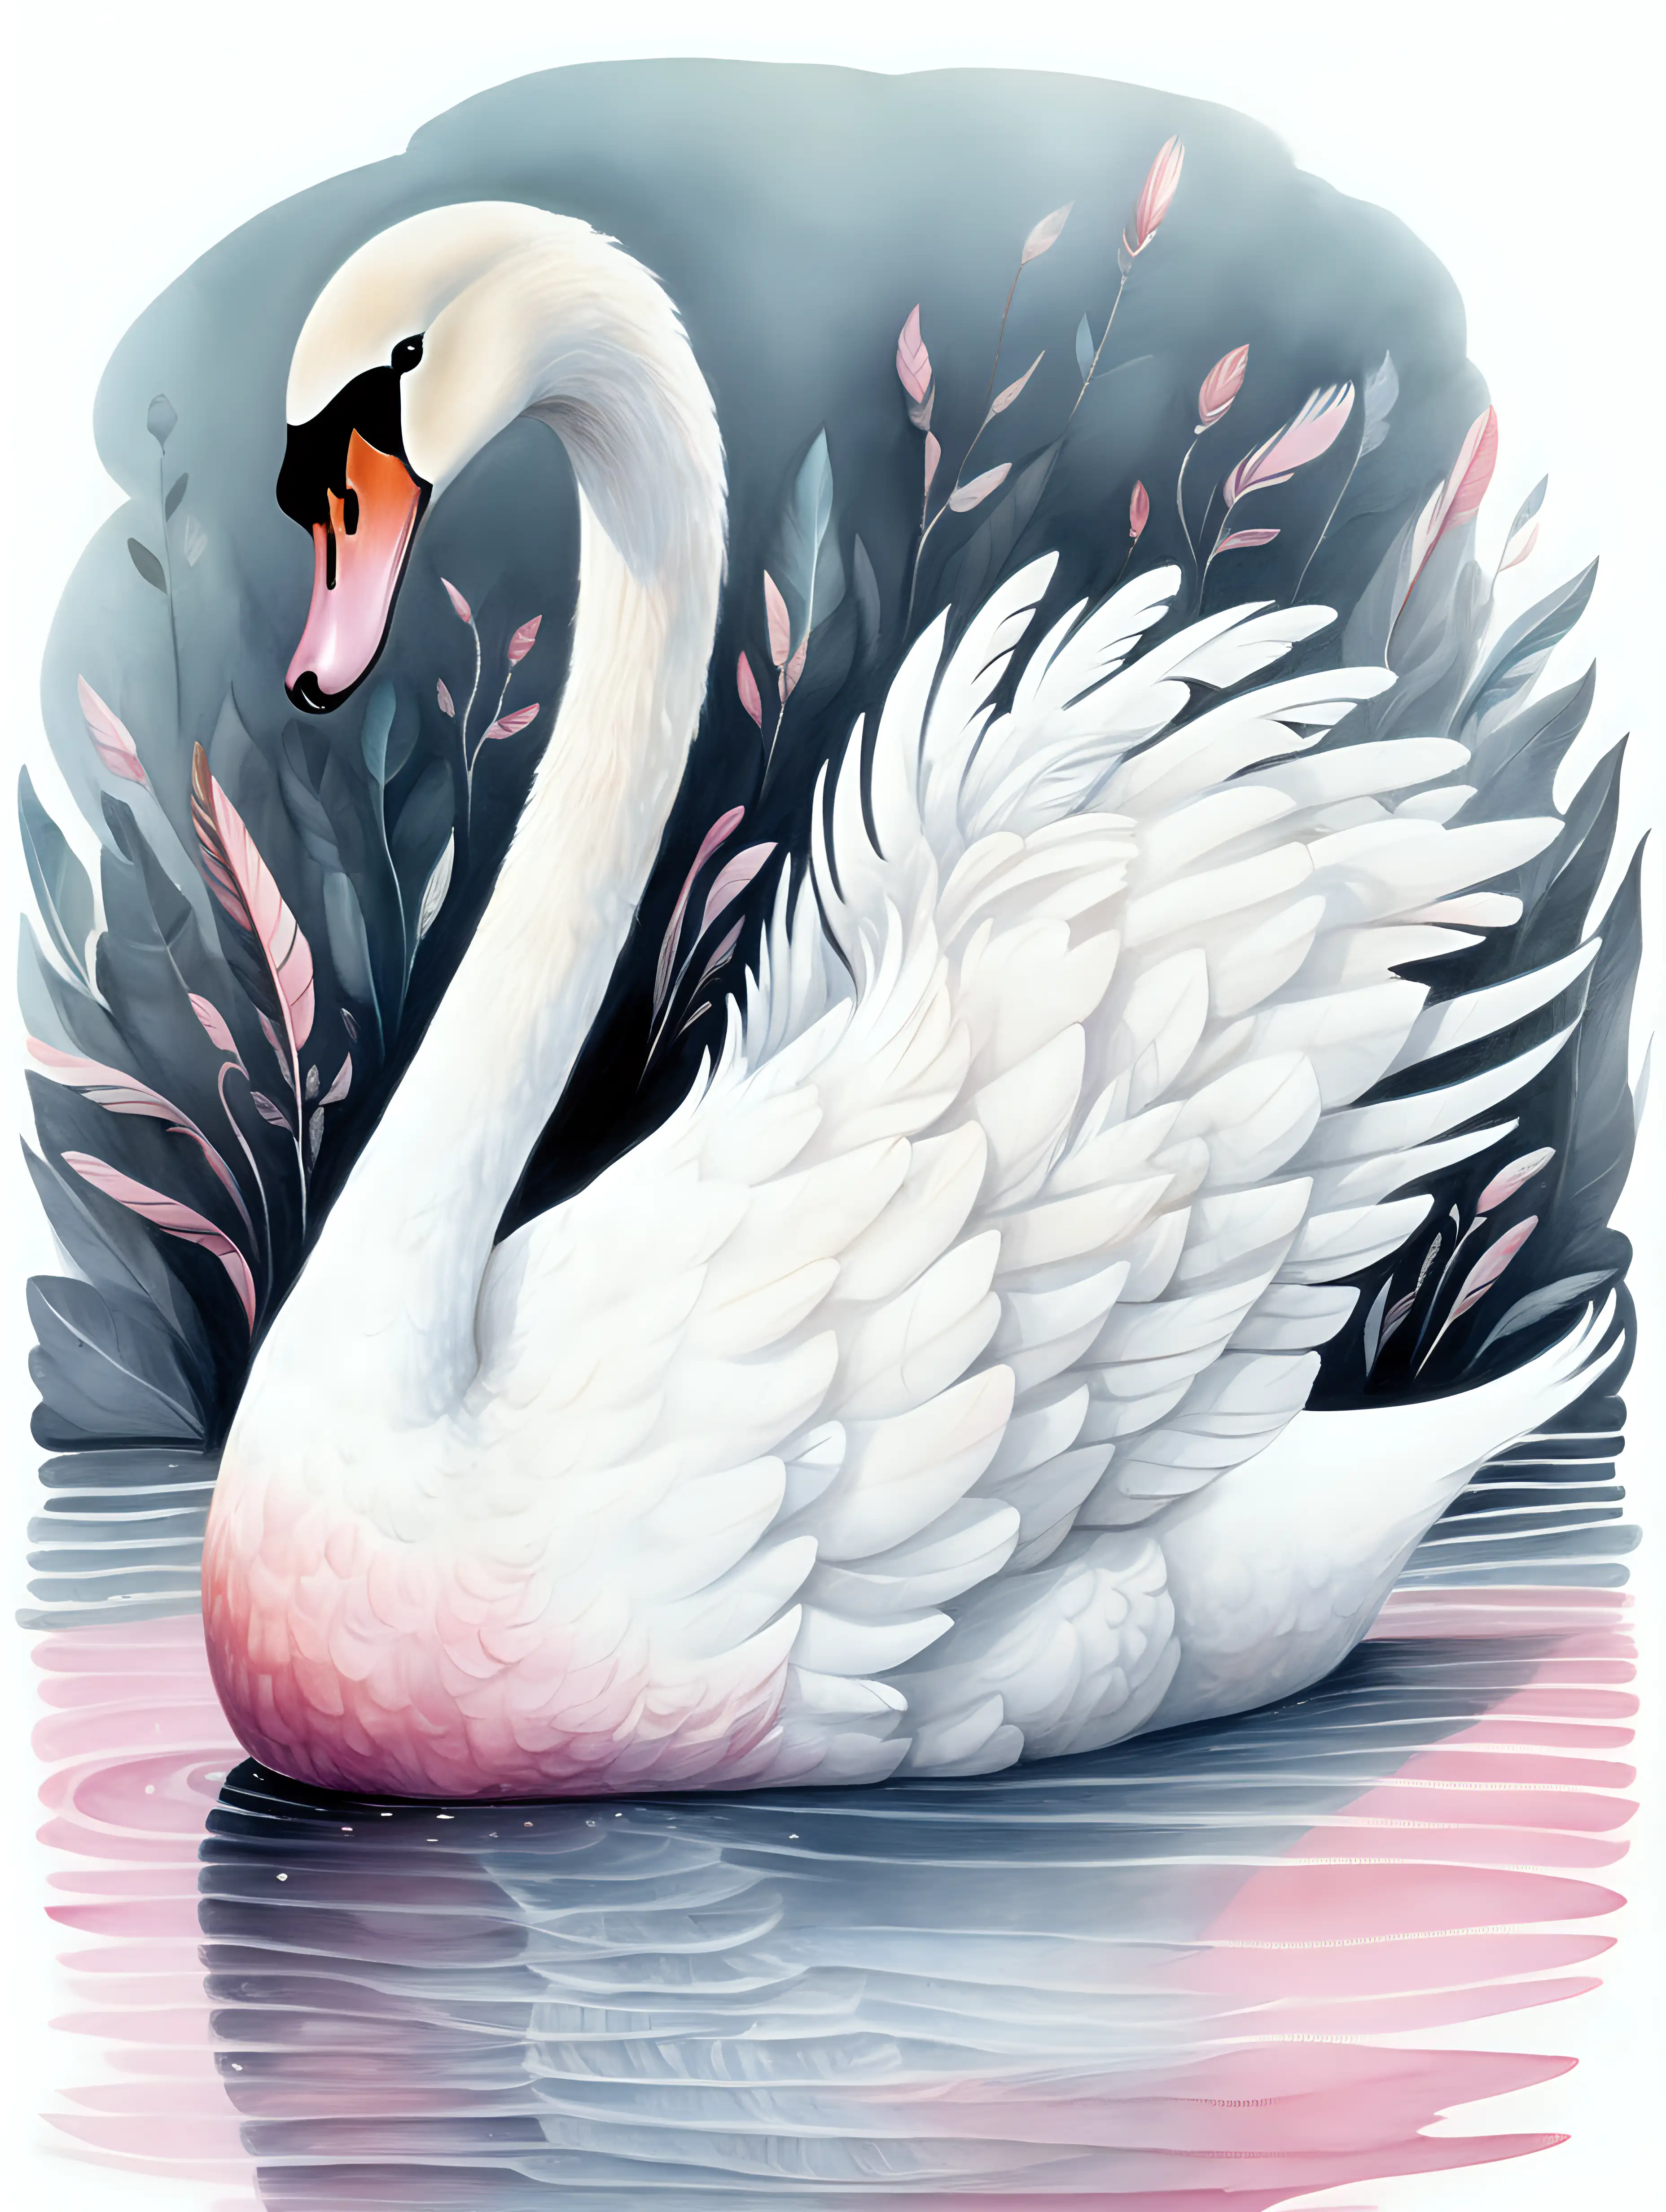 Whimsical Watercolor Illustration of a Cute White Swan with Pink Beak